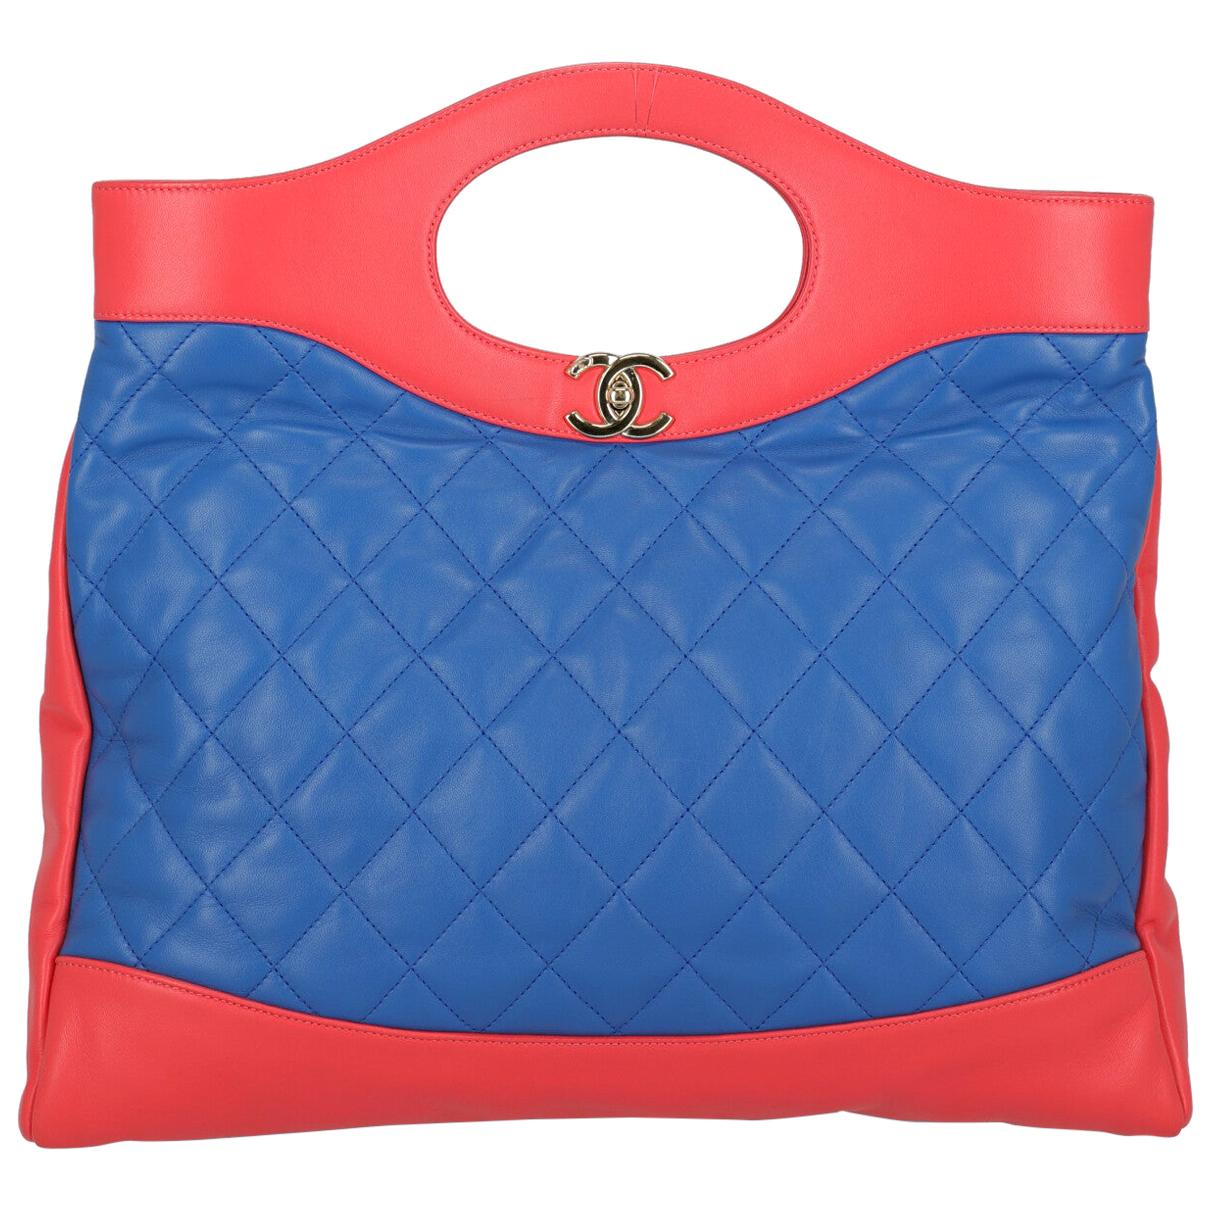 Chanel Women's Tote Bag 31 Navy/Red Leather For Sale at 1stDibs